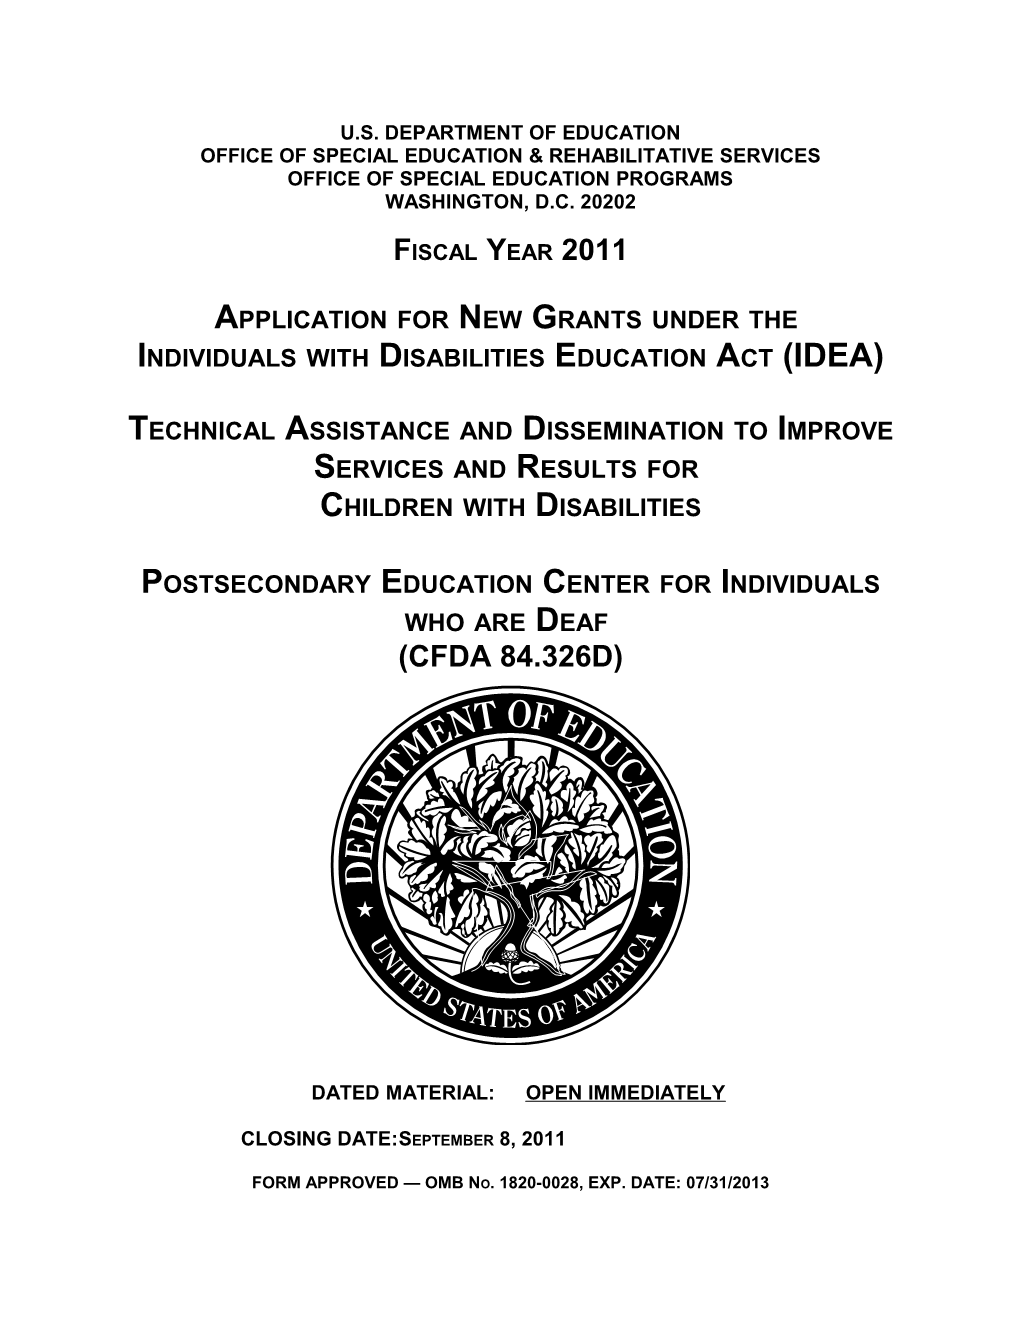 Fiscal Year 2011 Application for New Grants Under the Individuals with Disabilities Education